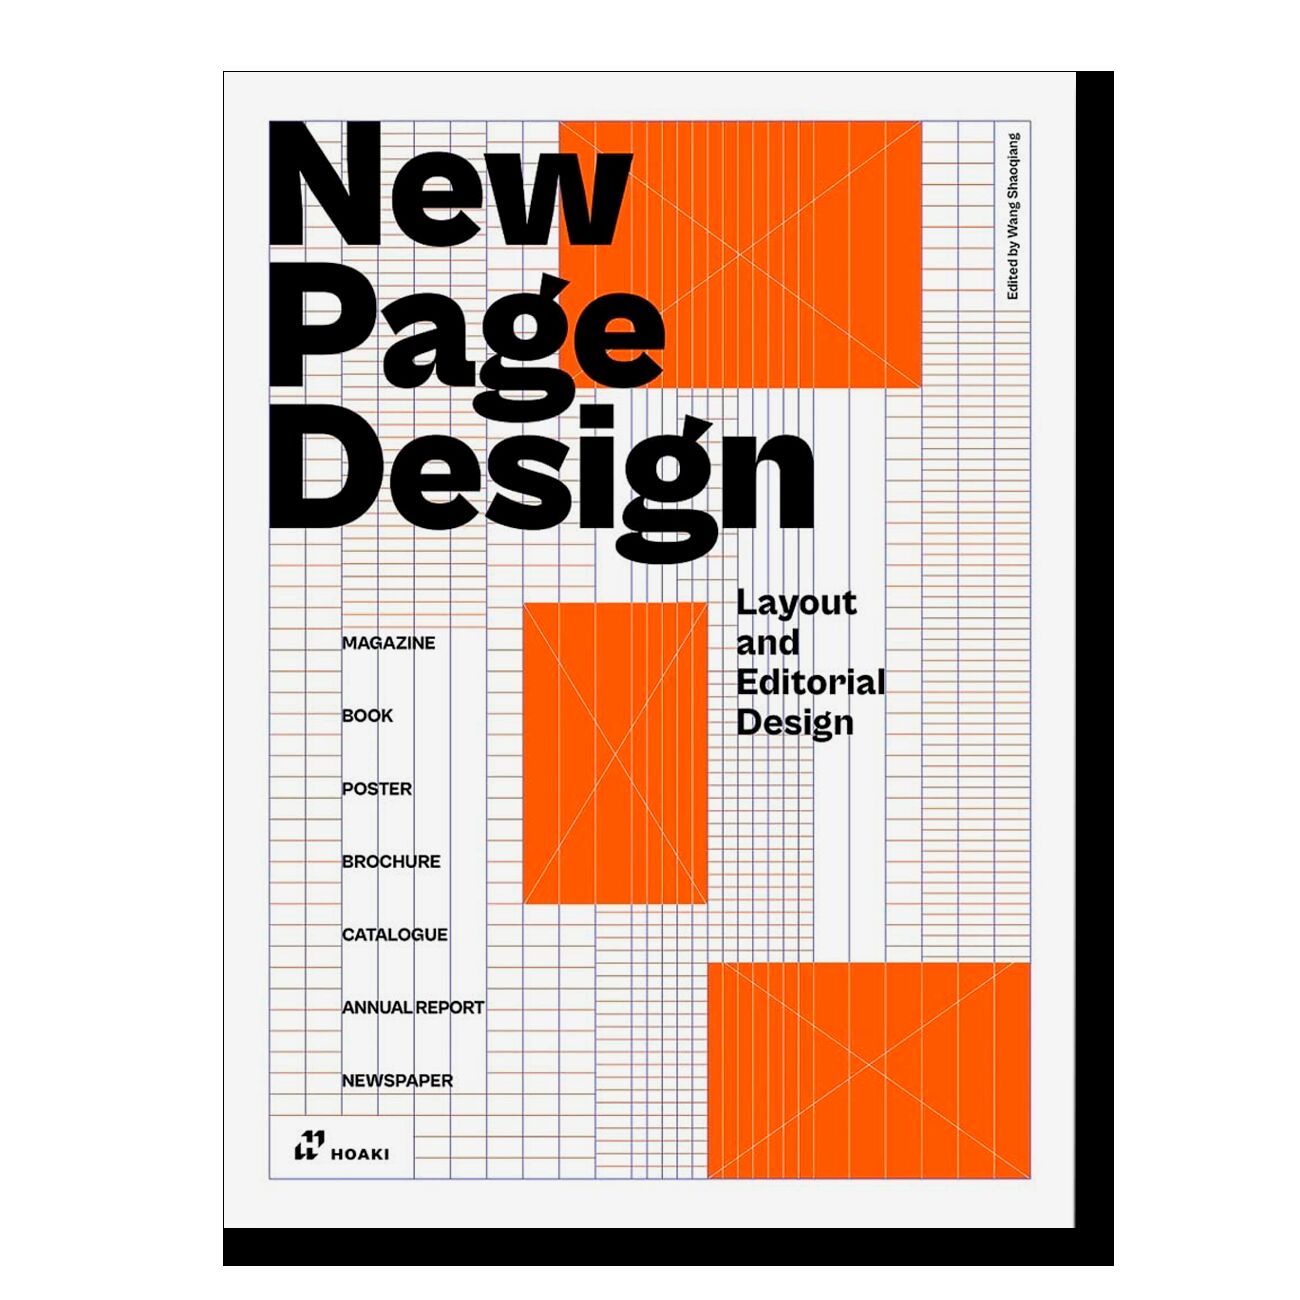 New Page Design: Layout and Editorial Design